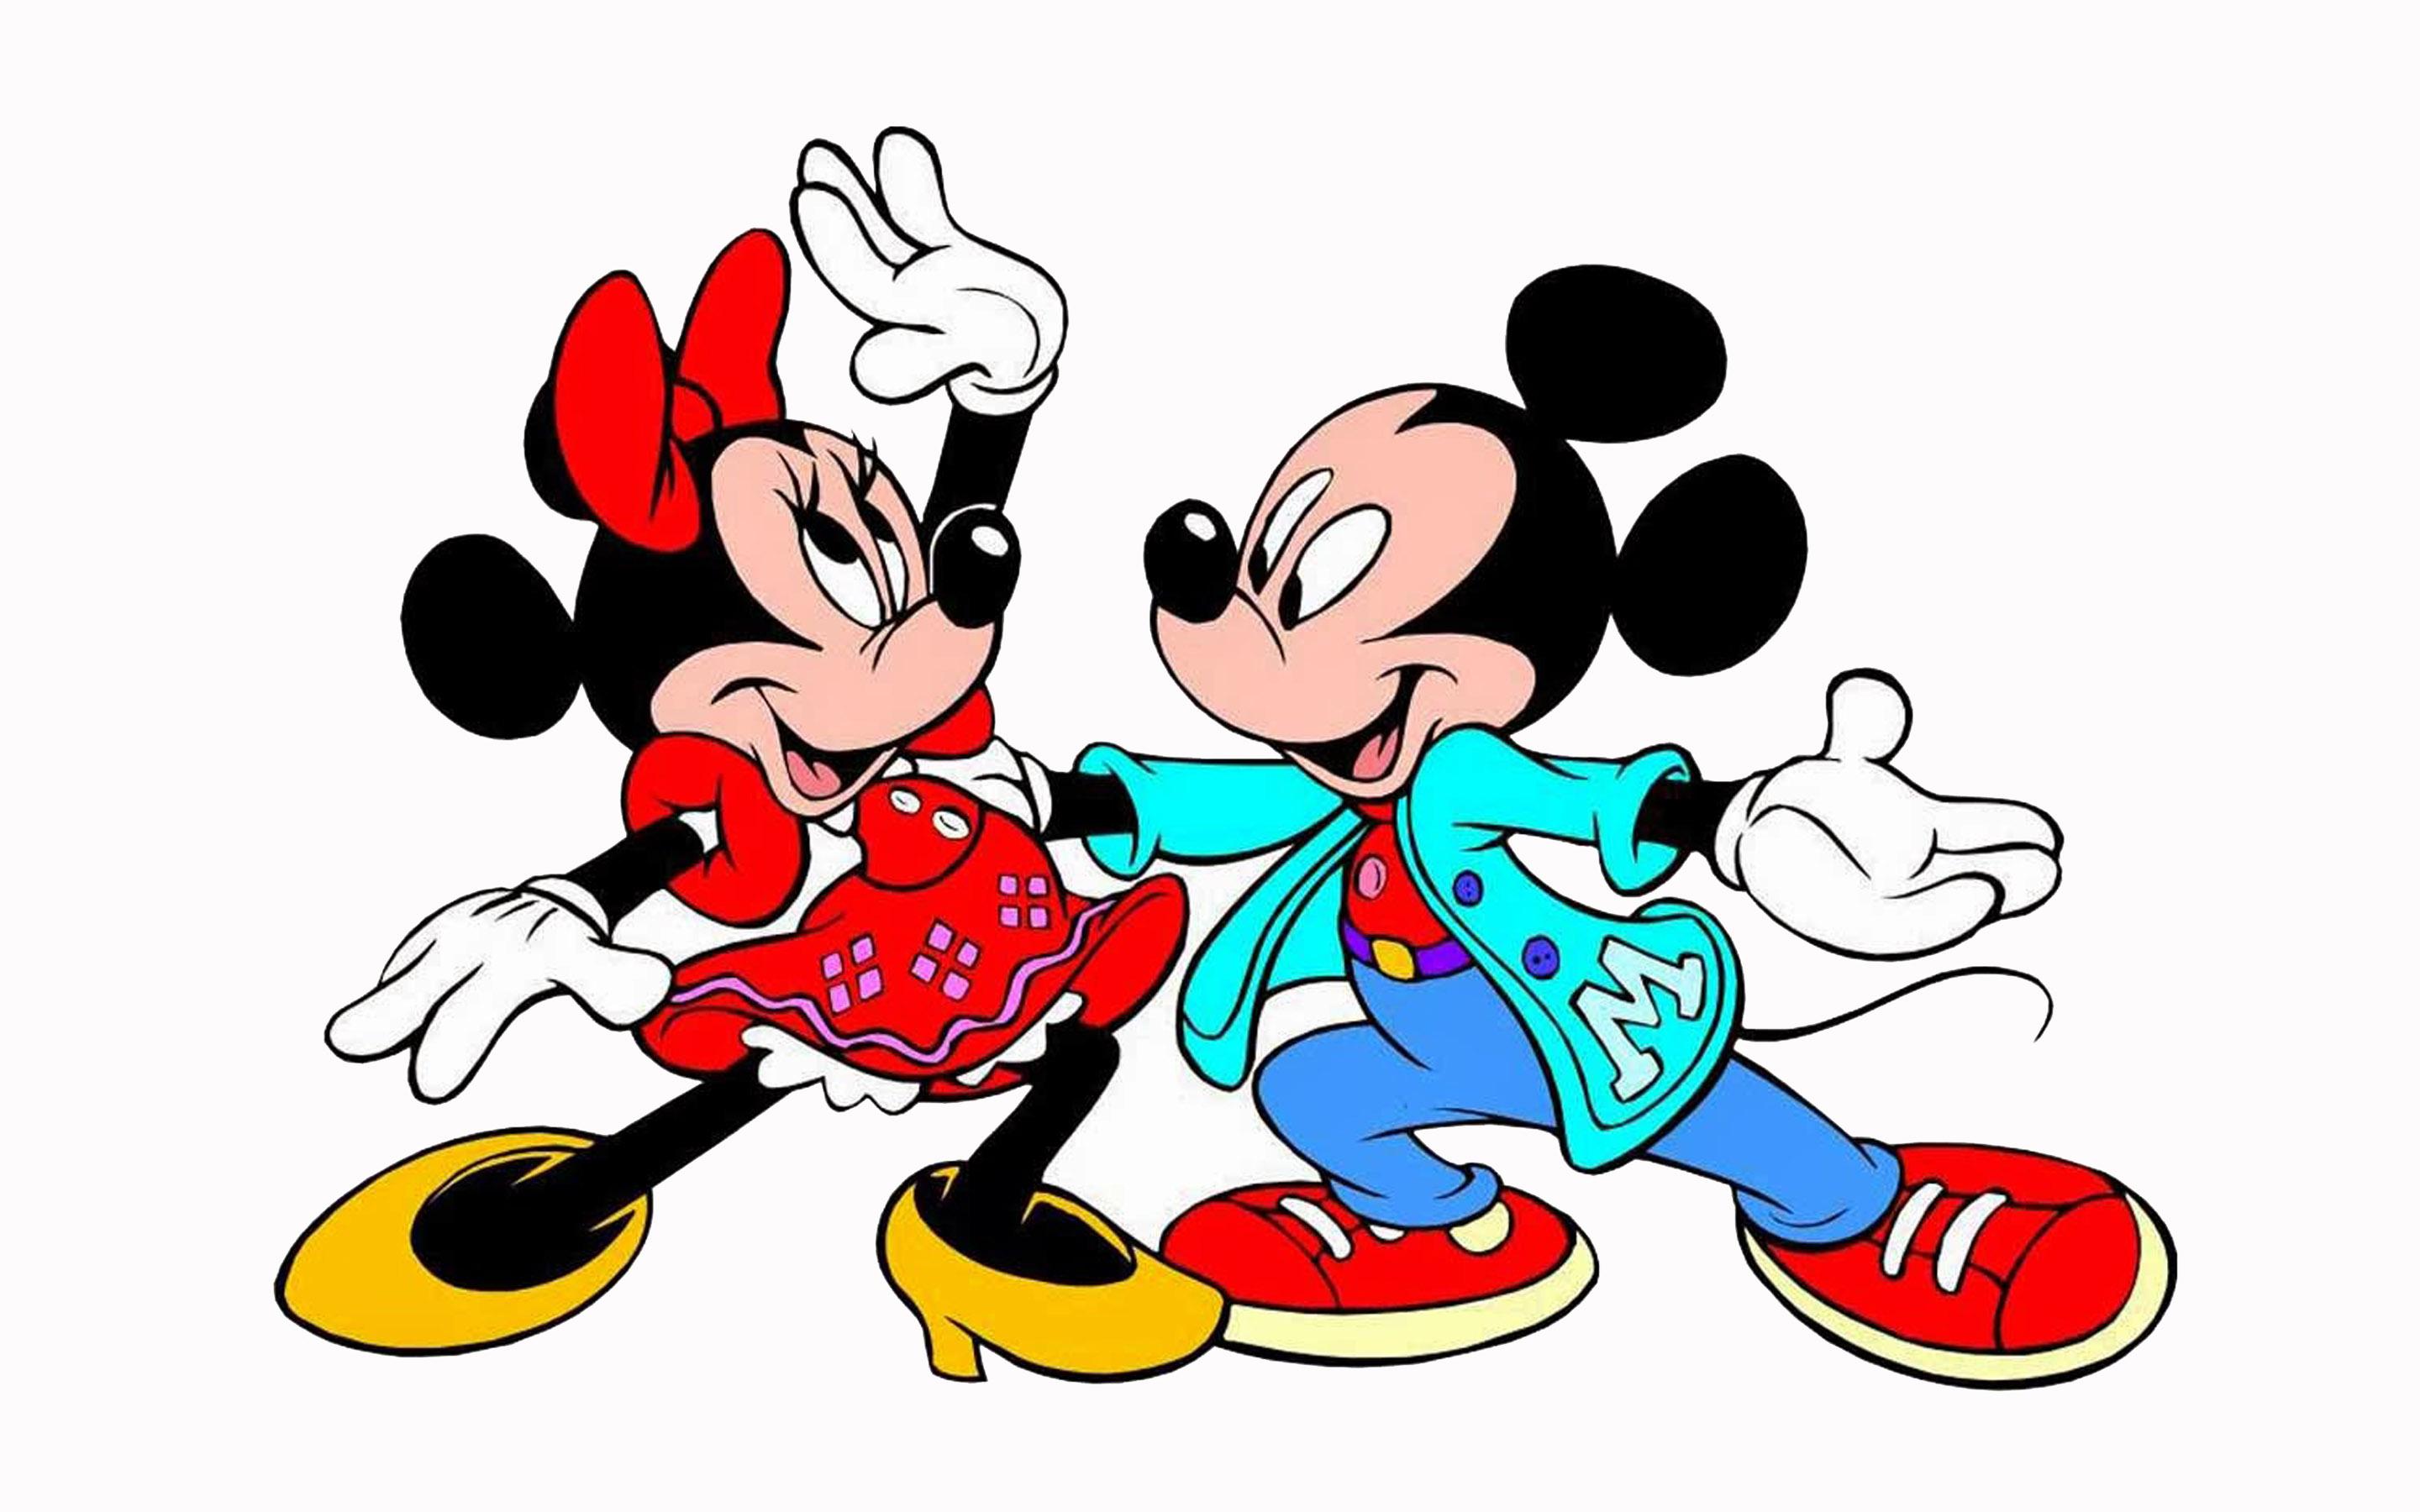 Mickey Minnie Mouse Dancing Cartoons HD Wallpaper For Mobile Phones